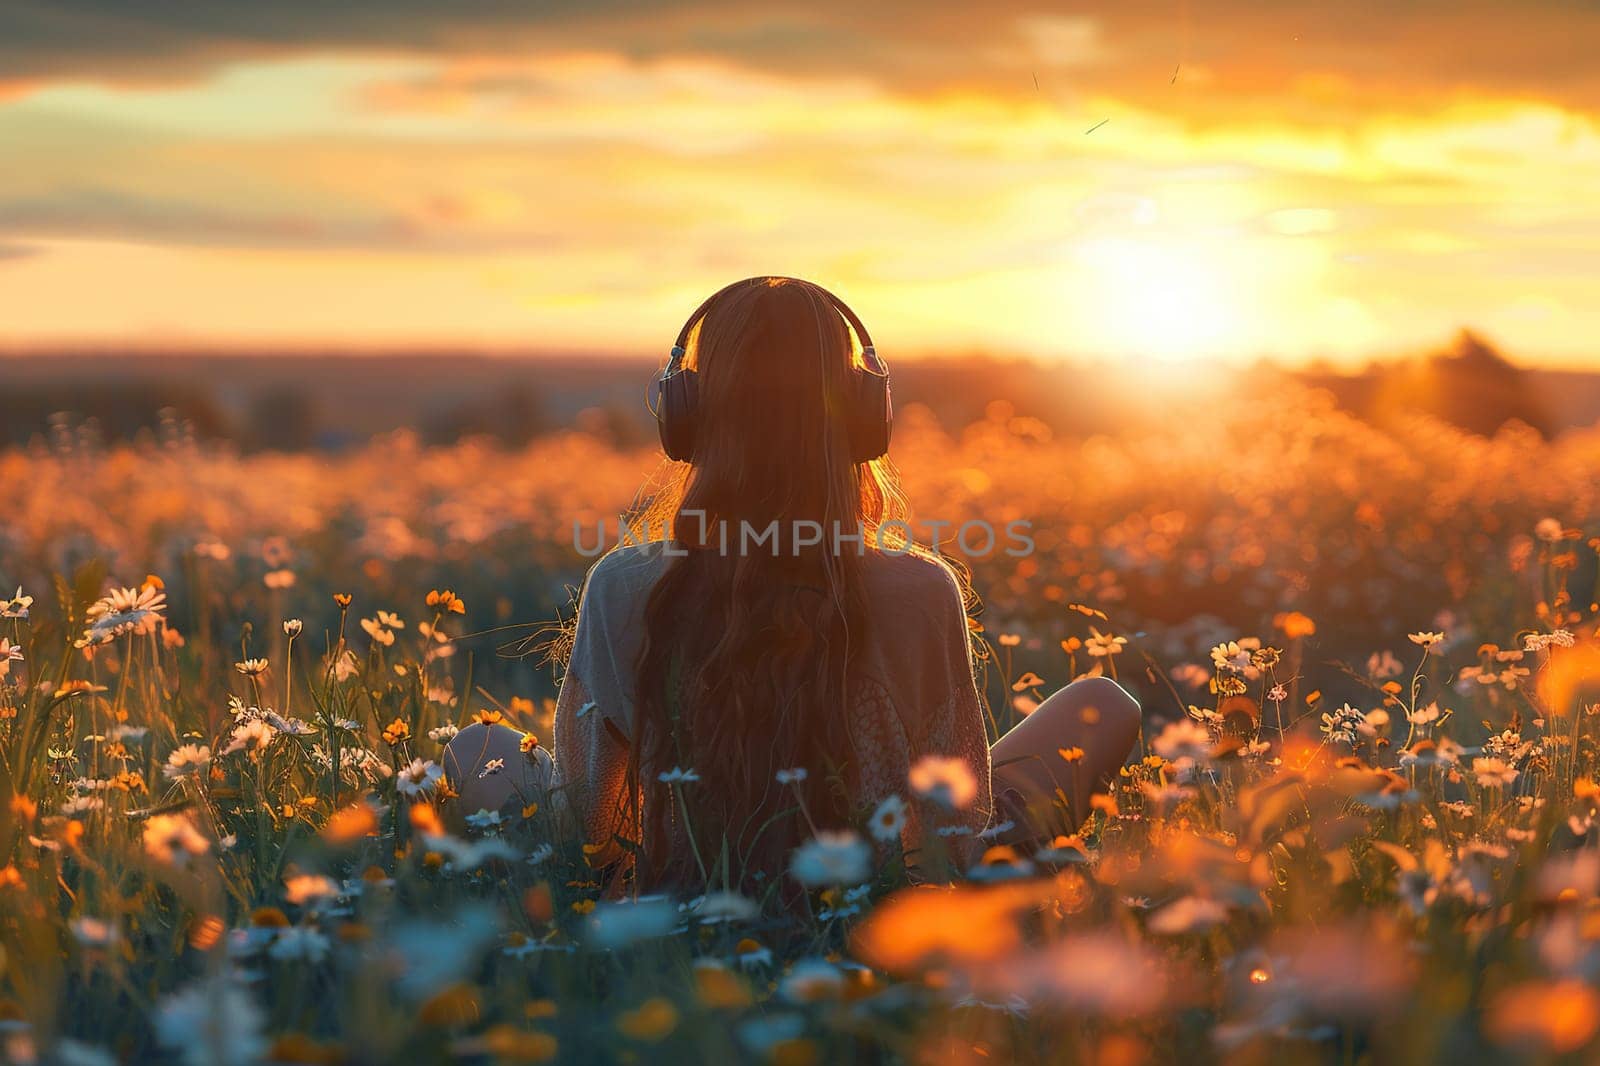 Rear view of a girl with long hair in large headphones sitting in a field of flowers at dawn, sunset. Generated by artificial intelligence by Vovmar